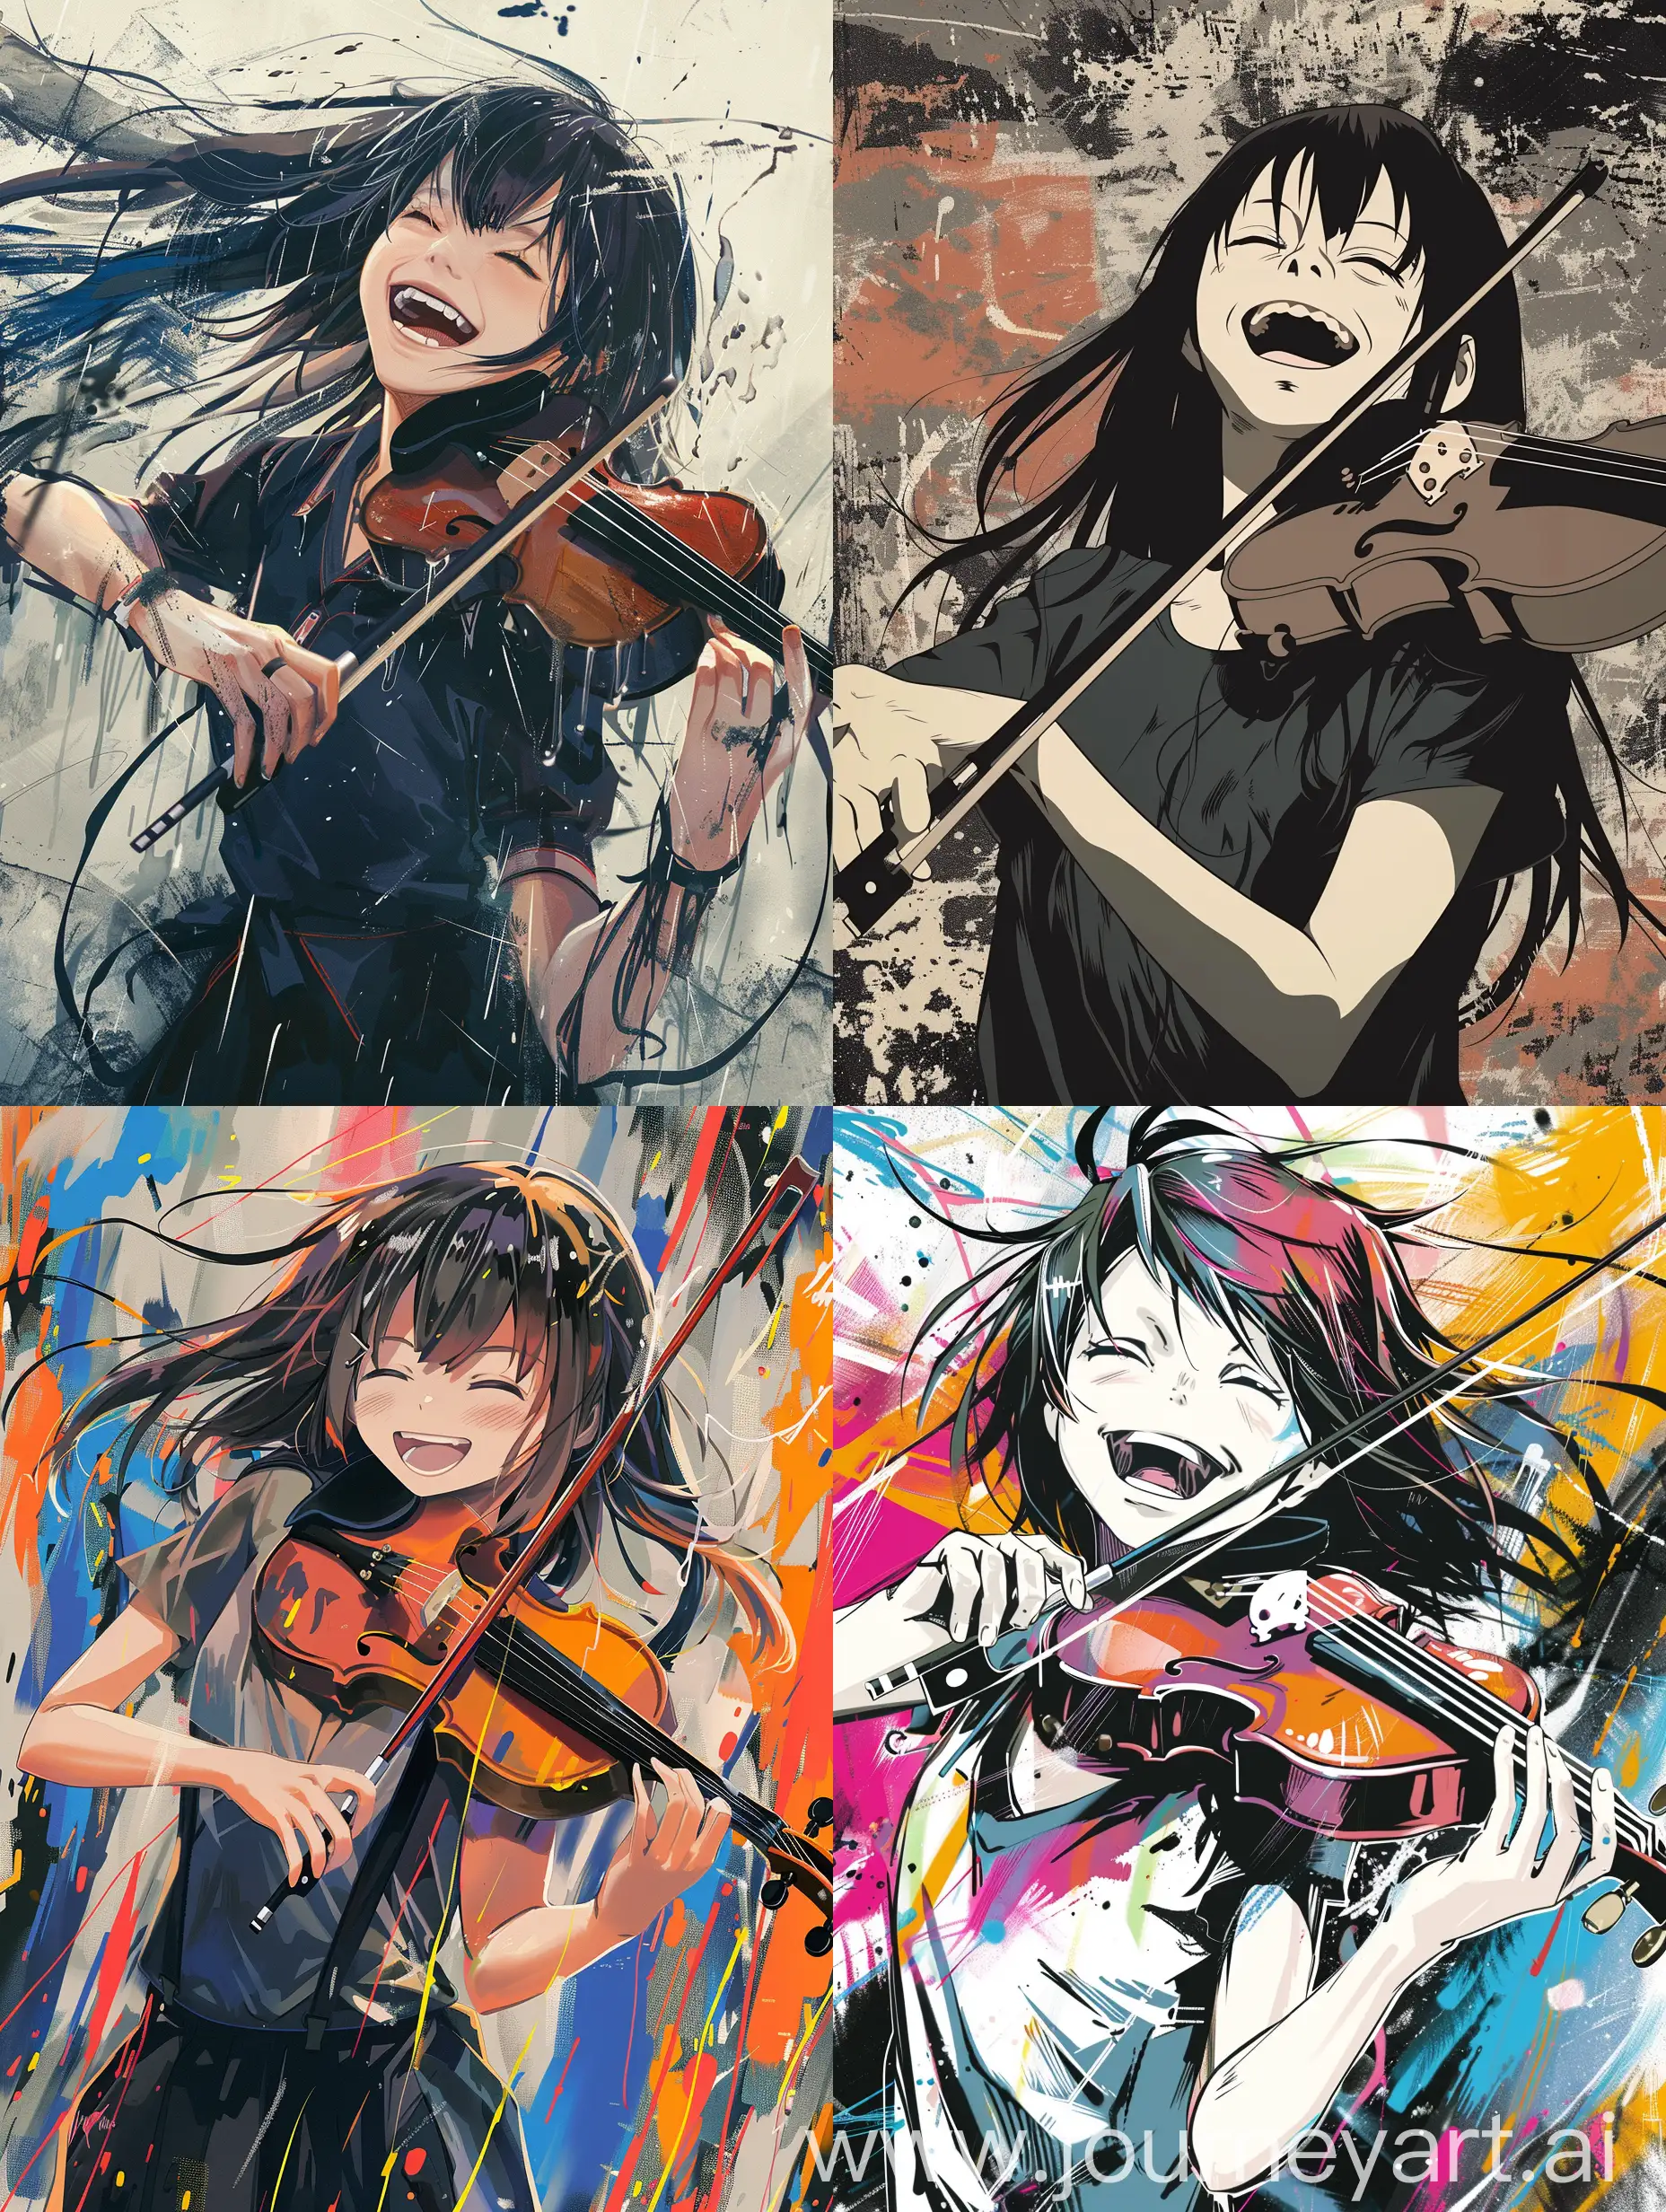 anime emo girl laughing, playing violin, with abstract background, strong lines